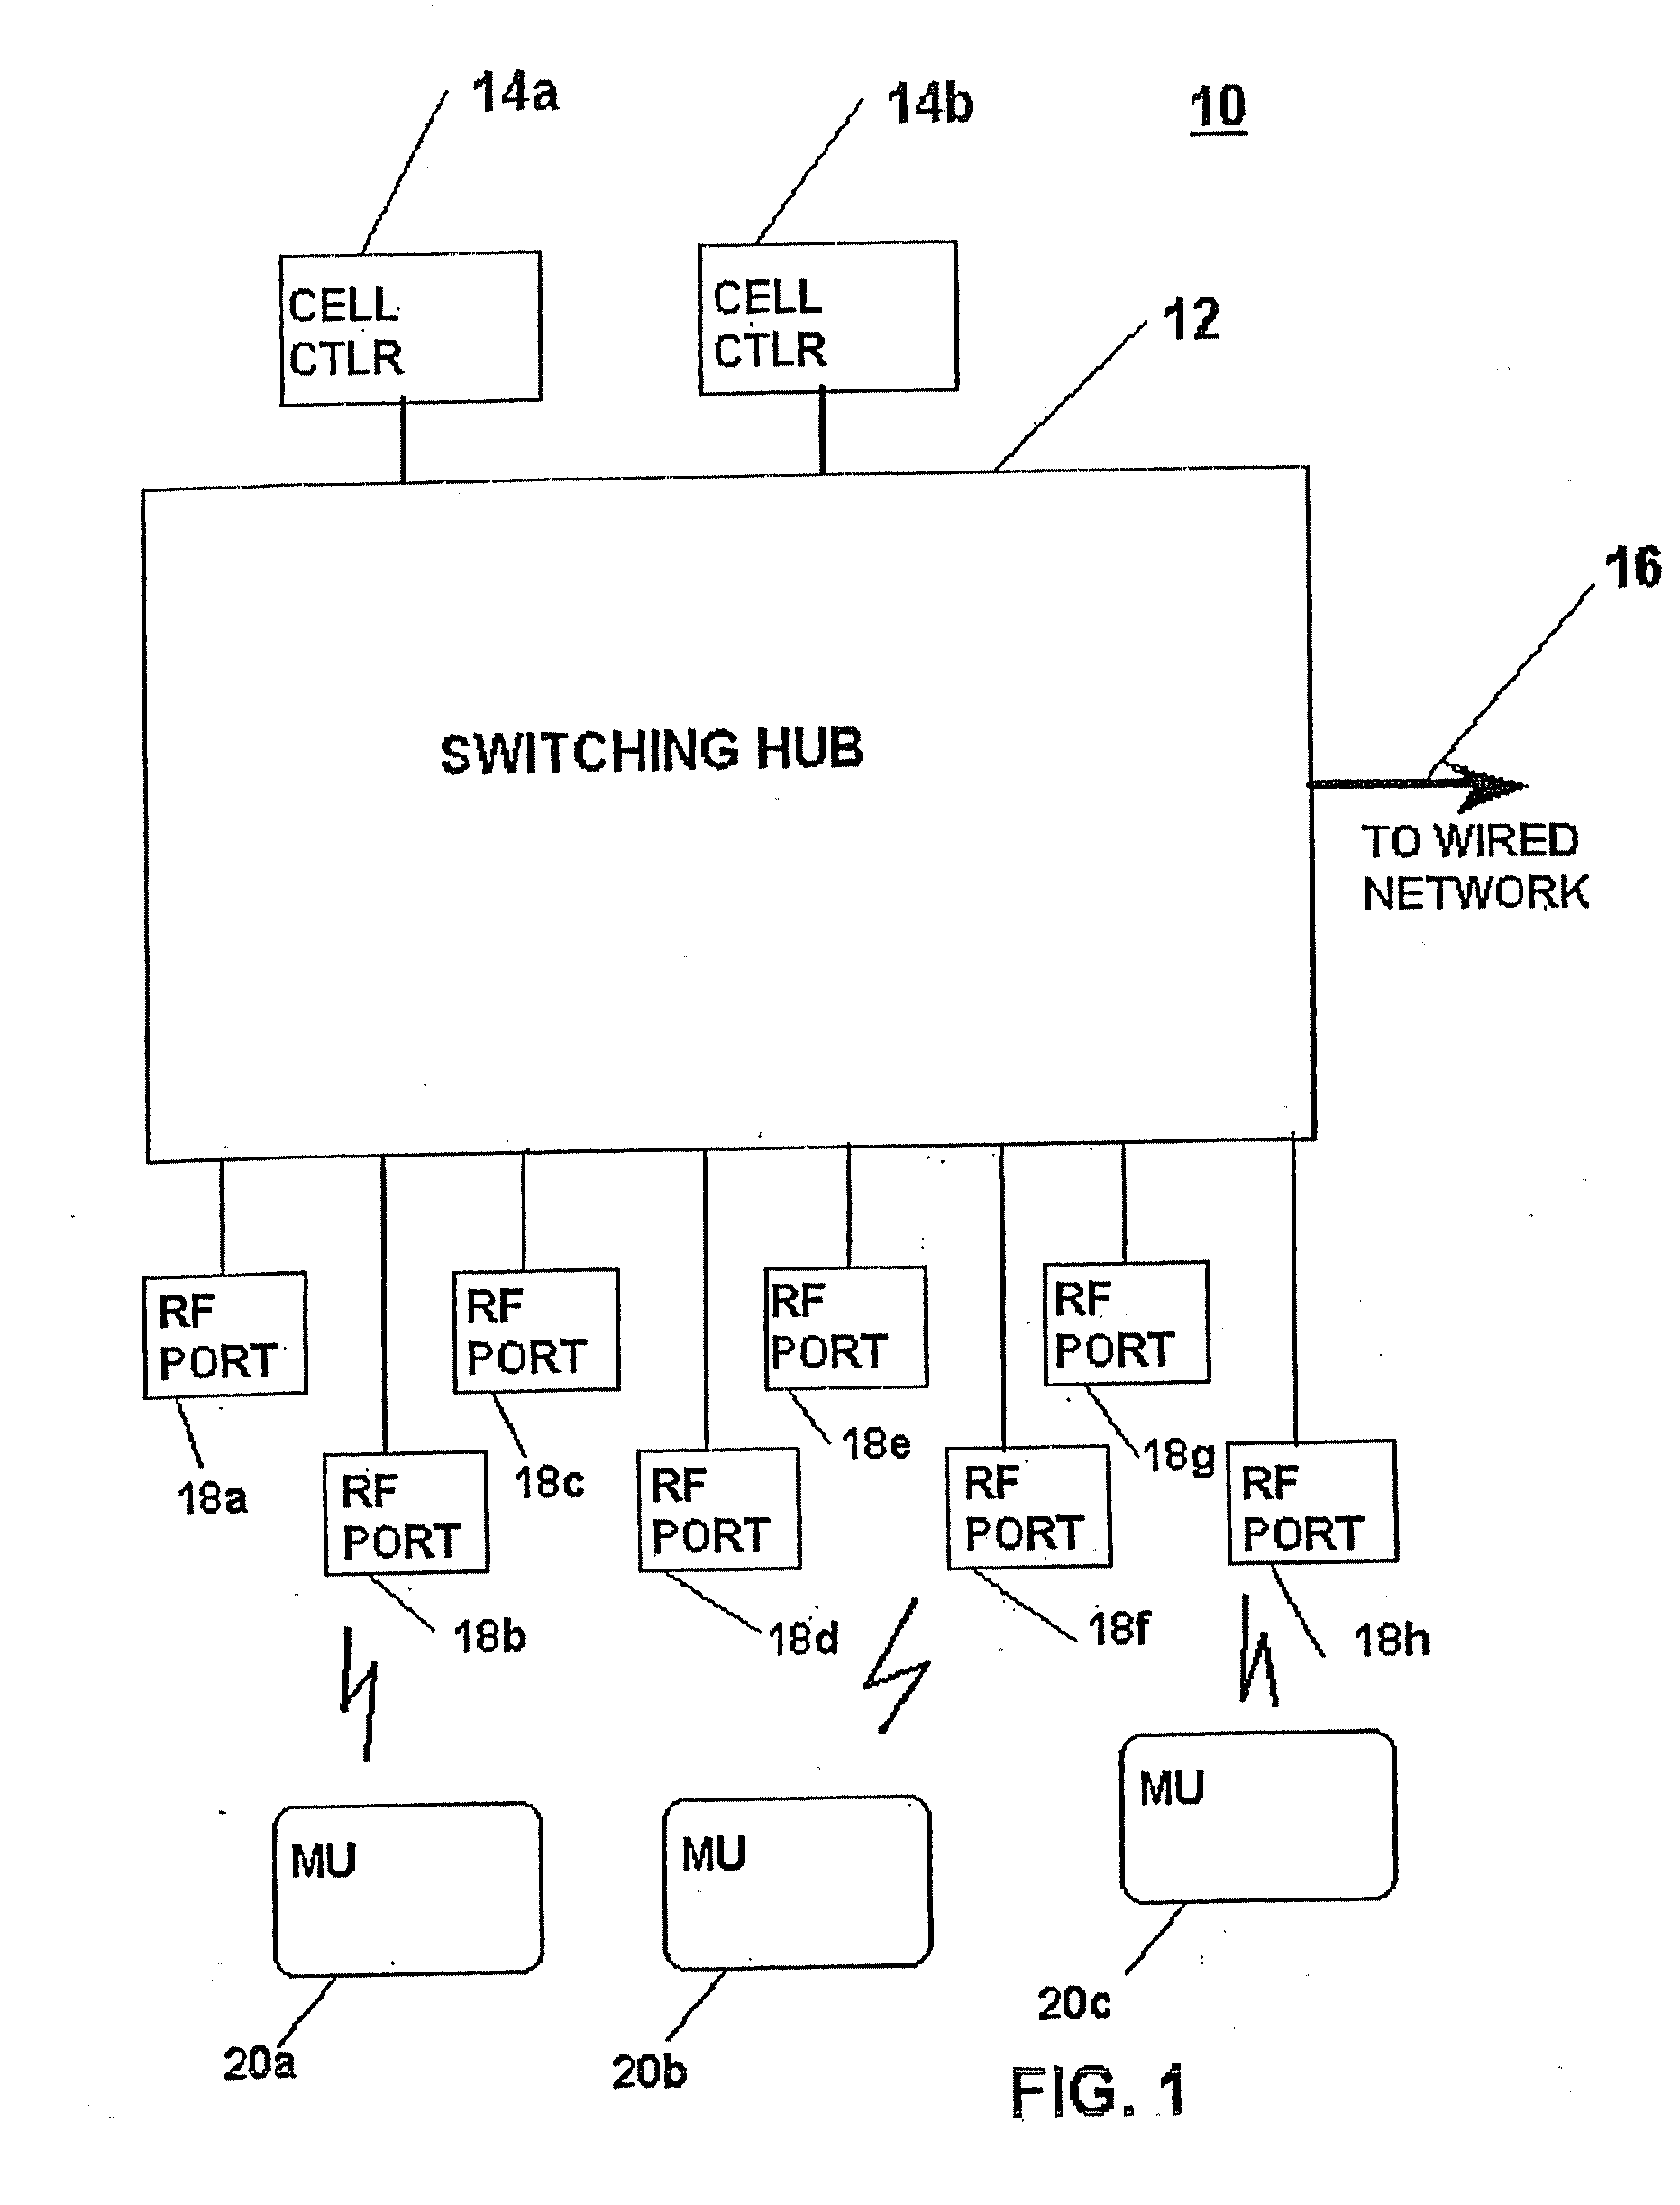 Cell controller adapted to perform a management function